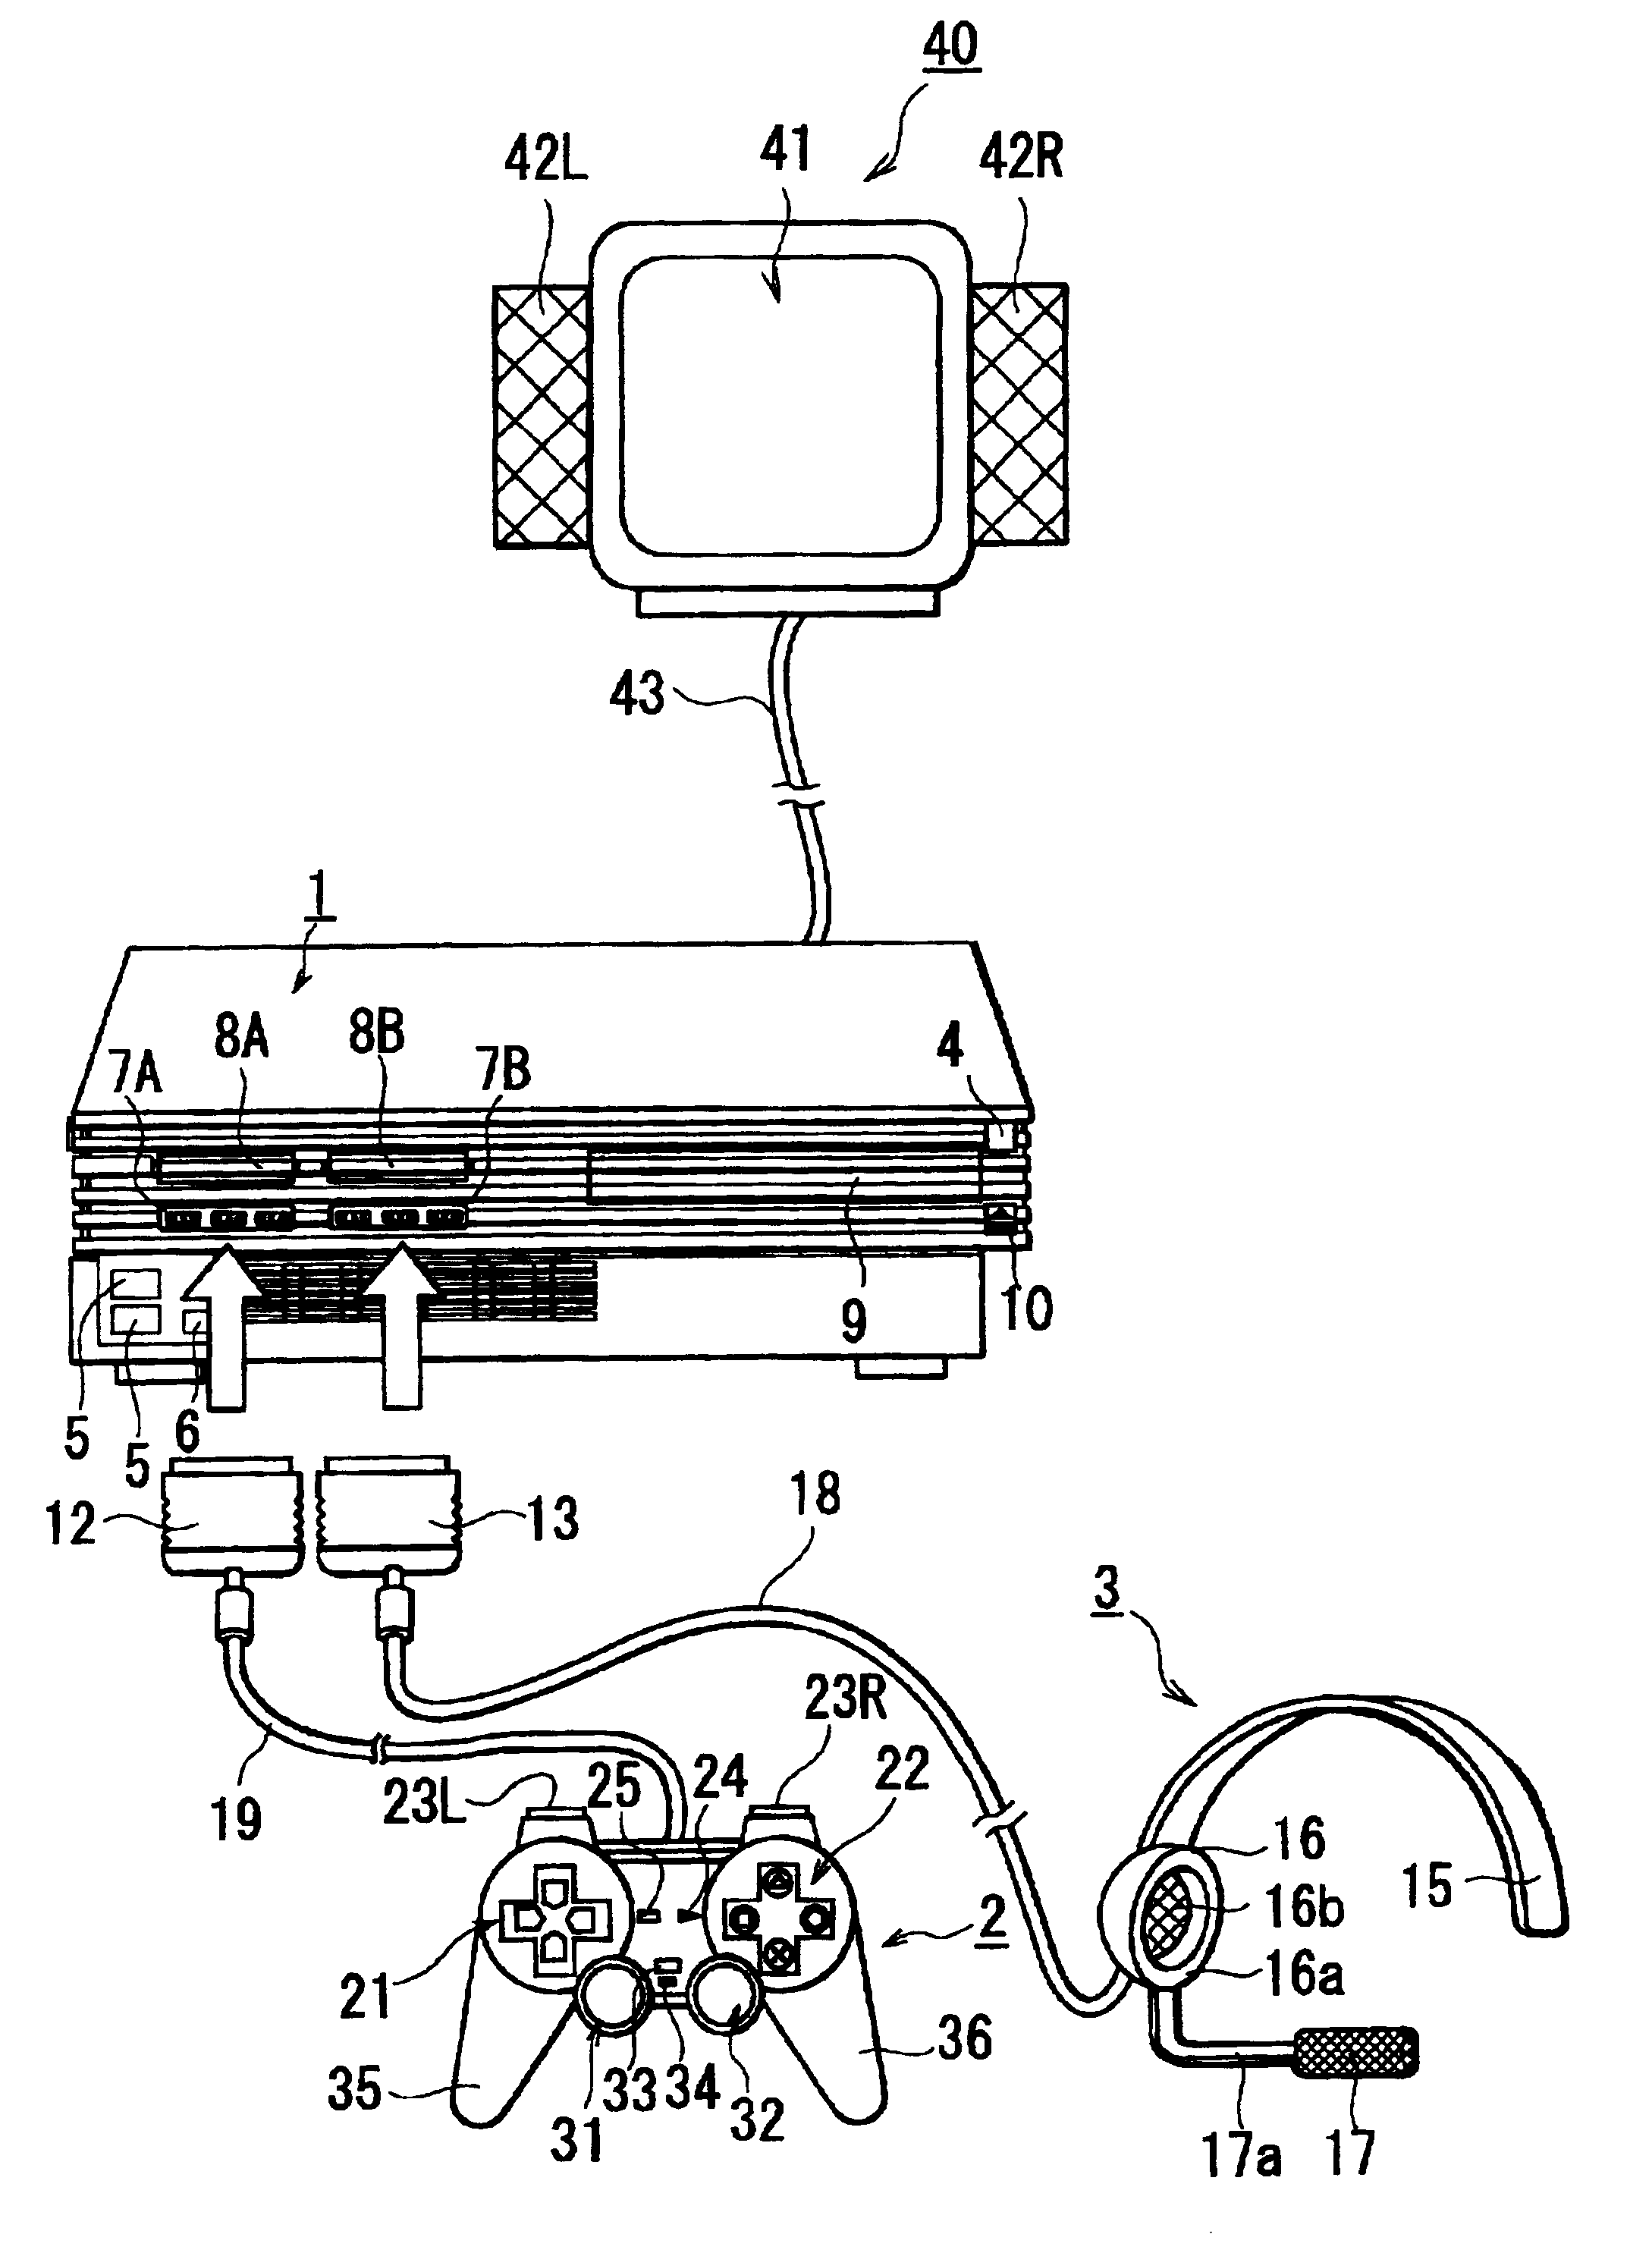 Sound control method and device for expressing game presence